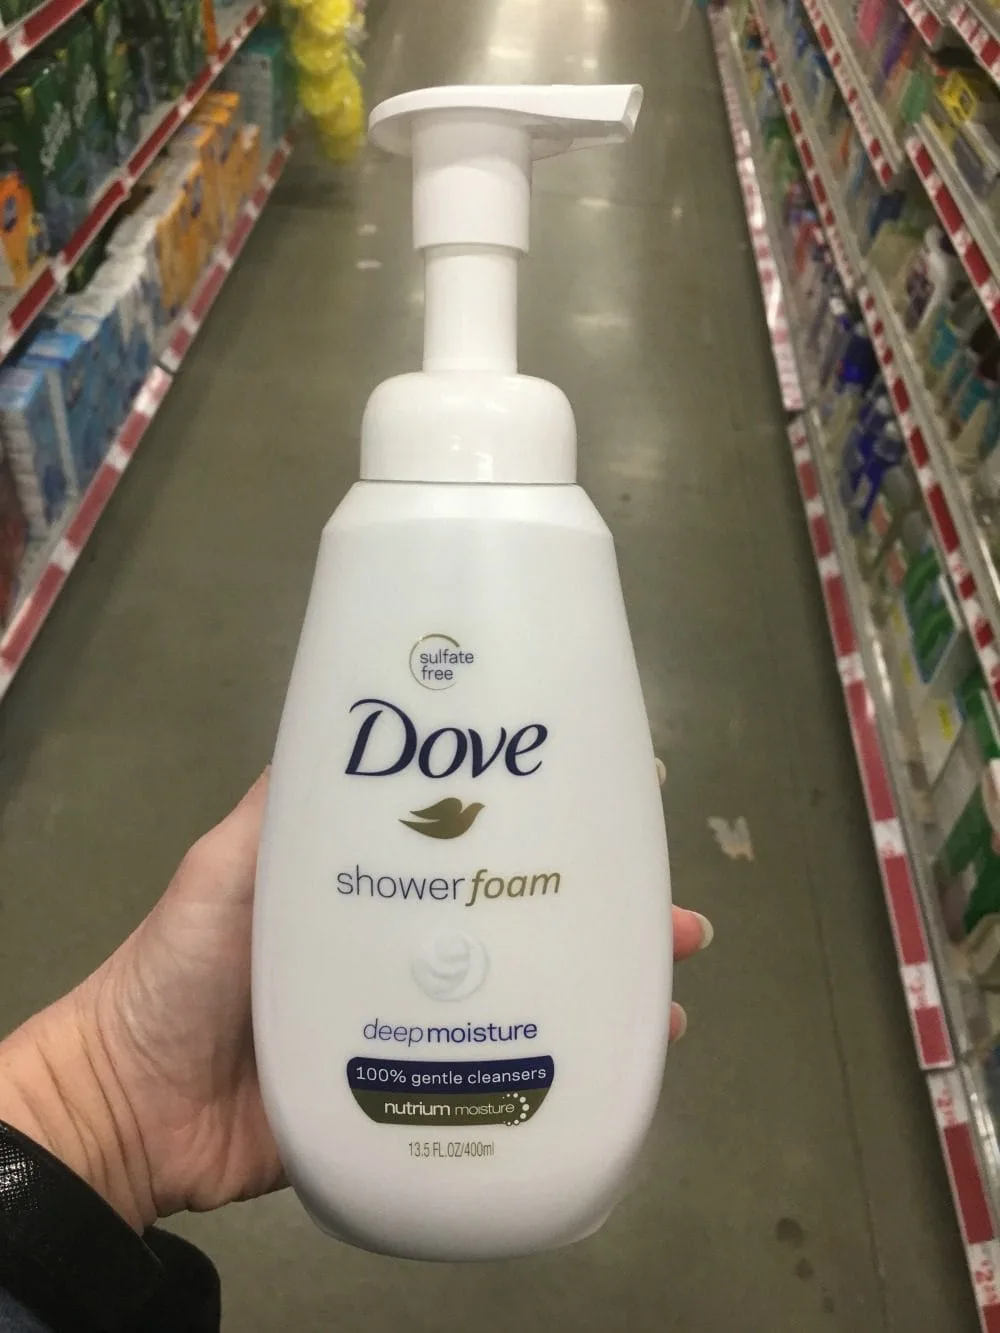 Dove shower foam found at Family Dollar.